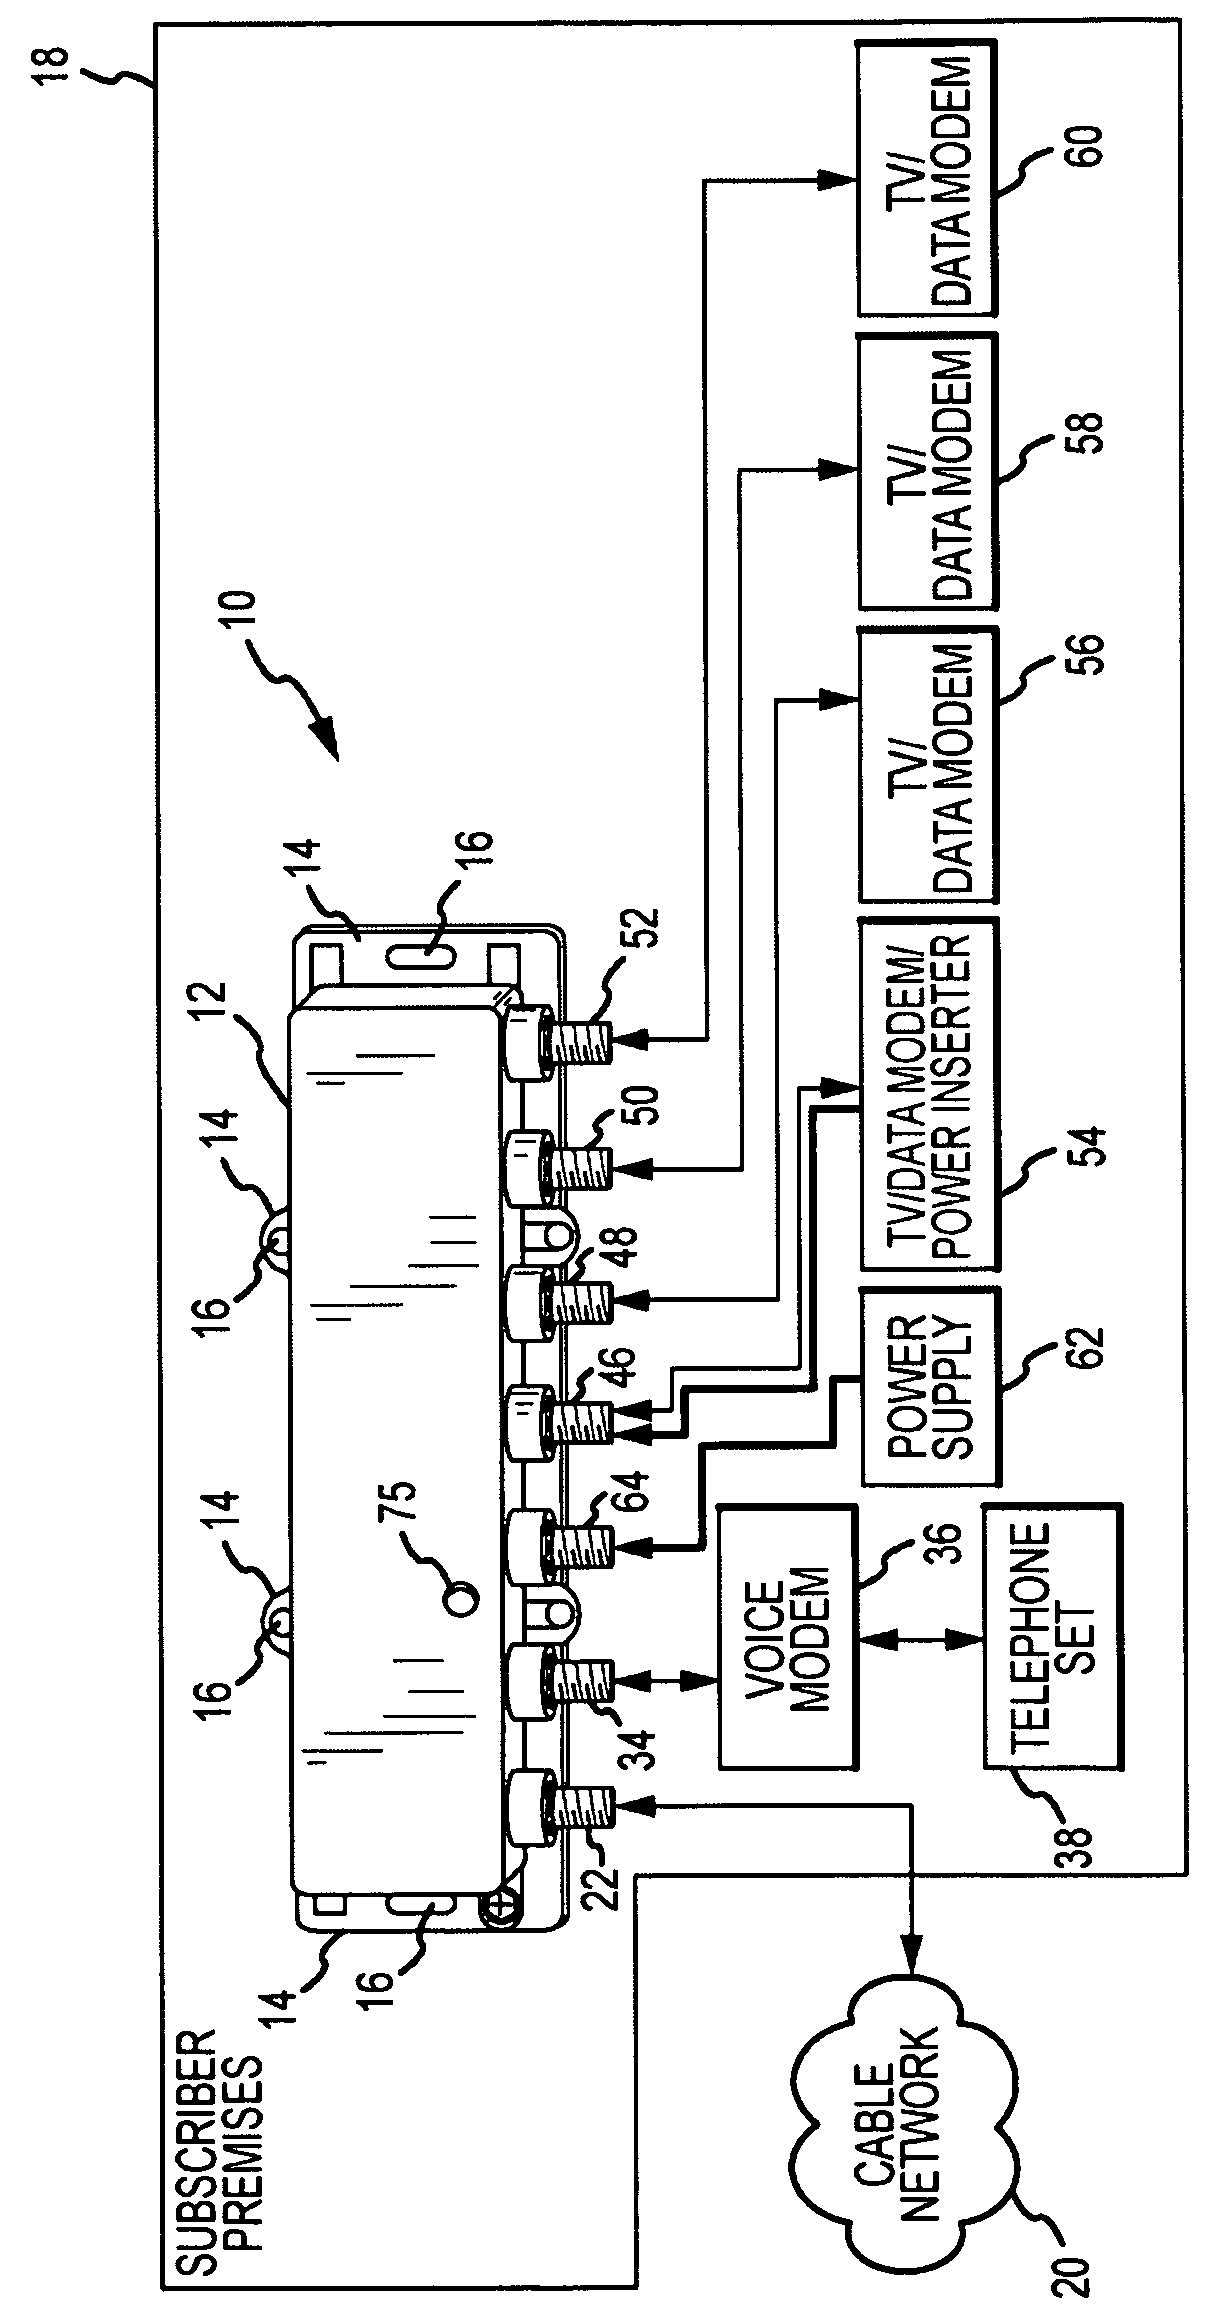 Passive-active terminal adapter and method having automatic return loss control